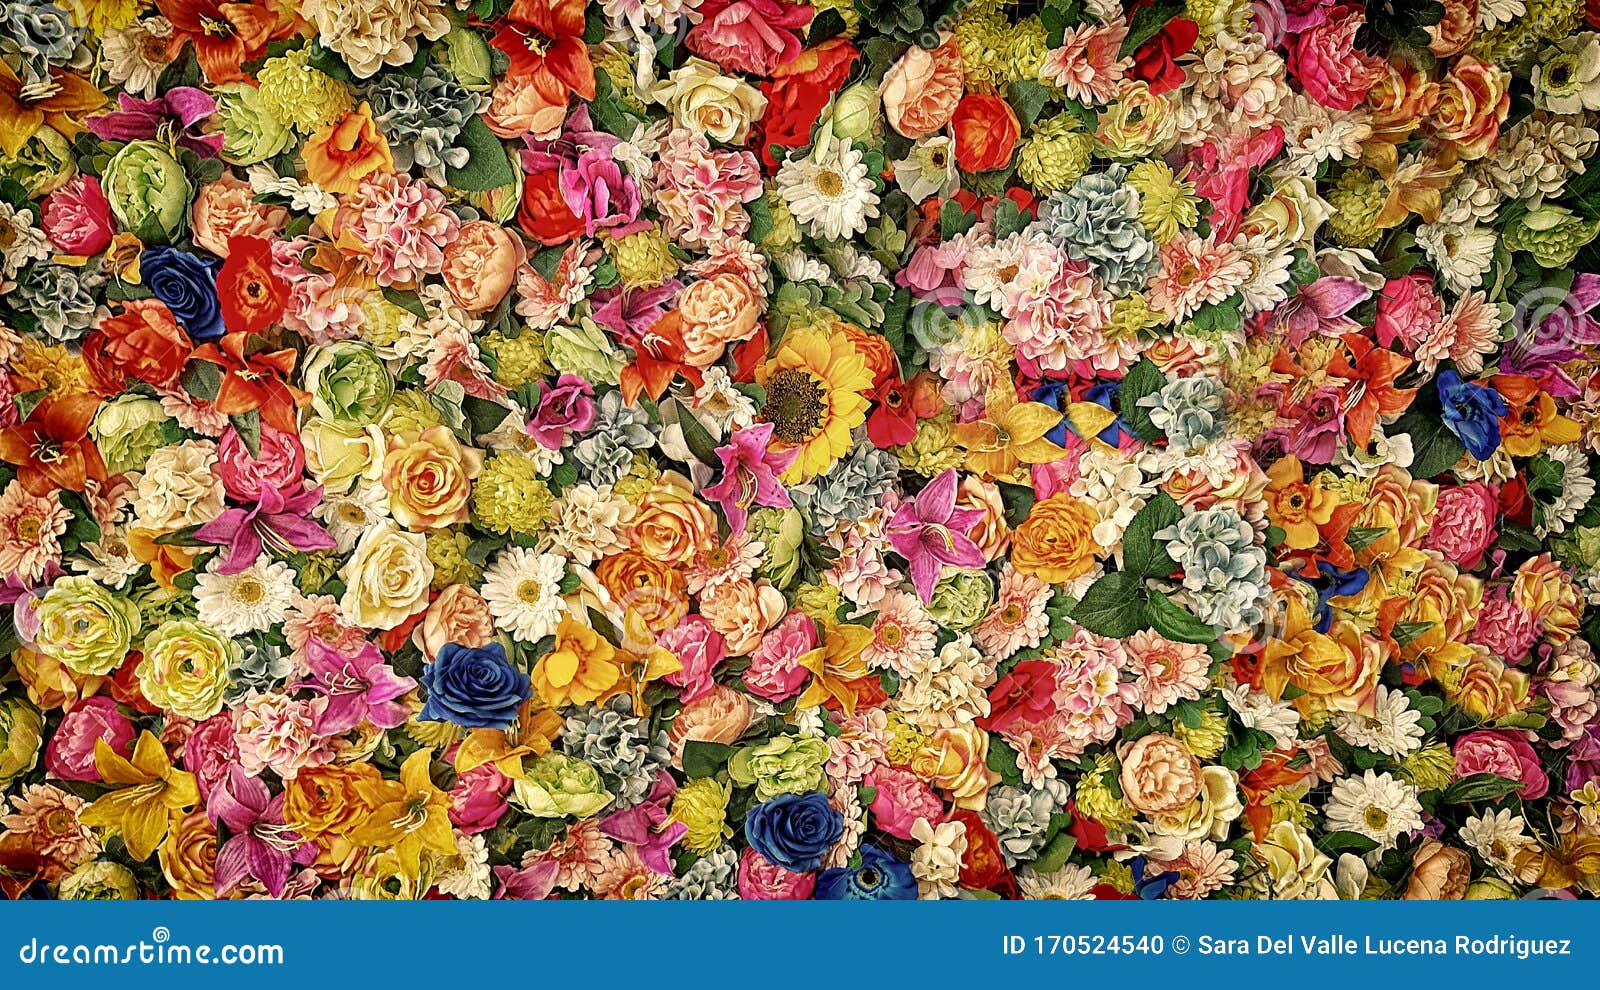 wall of multicolored flowers with rose tulipan margaritas